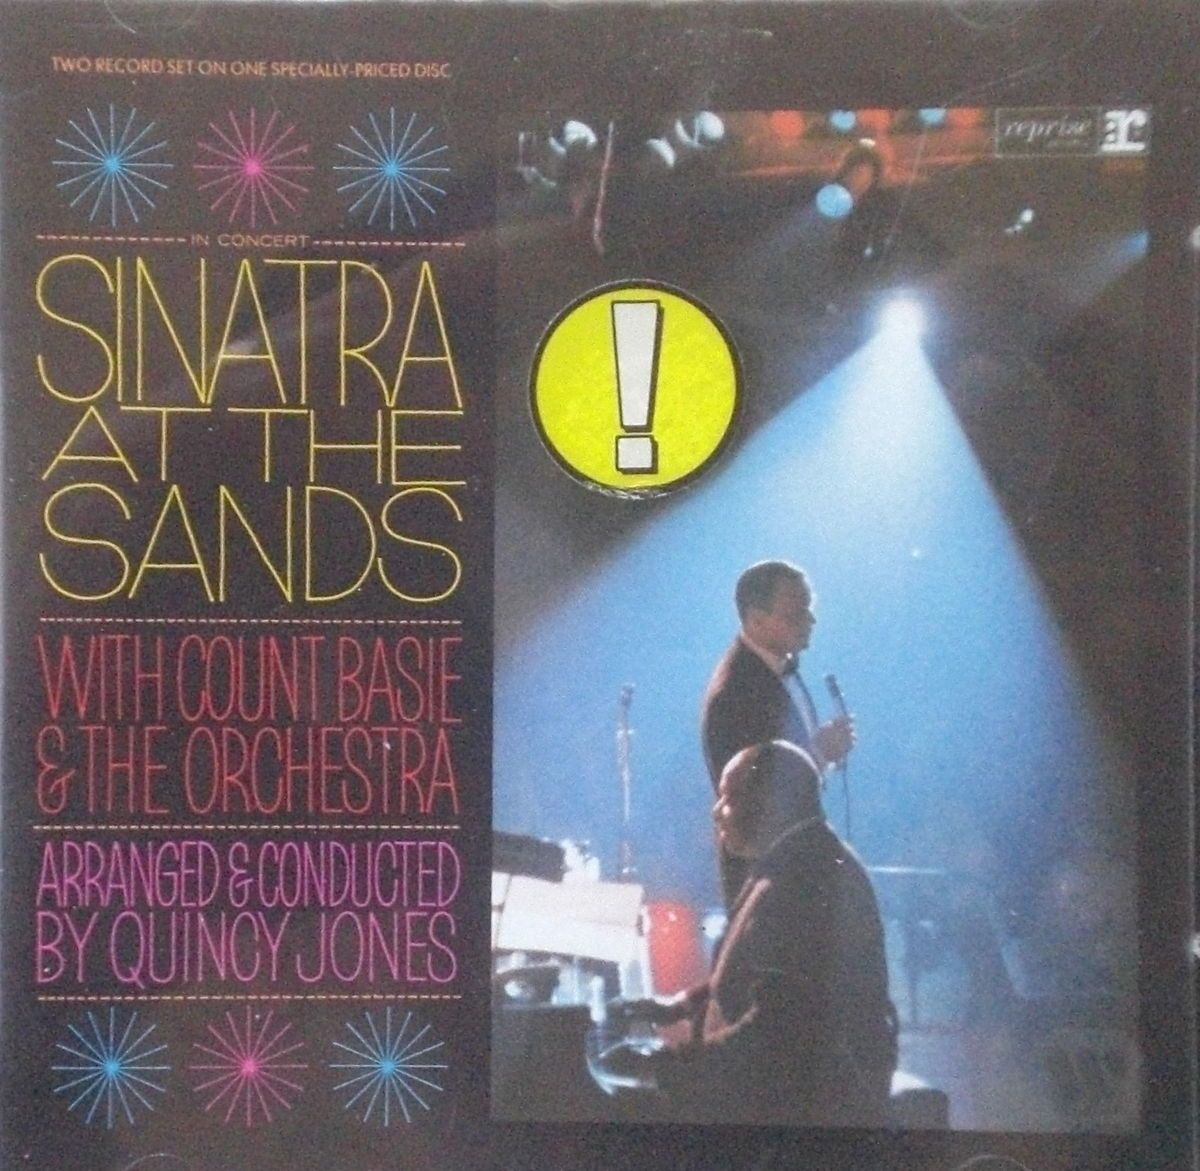 Frank Sinatra at The Sands with Count Basie Reprise CD